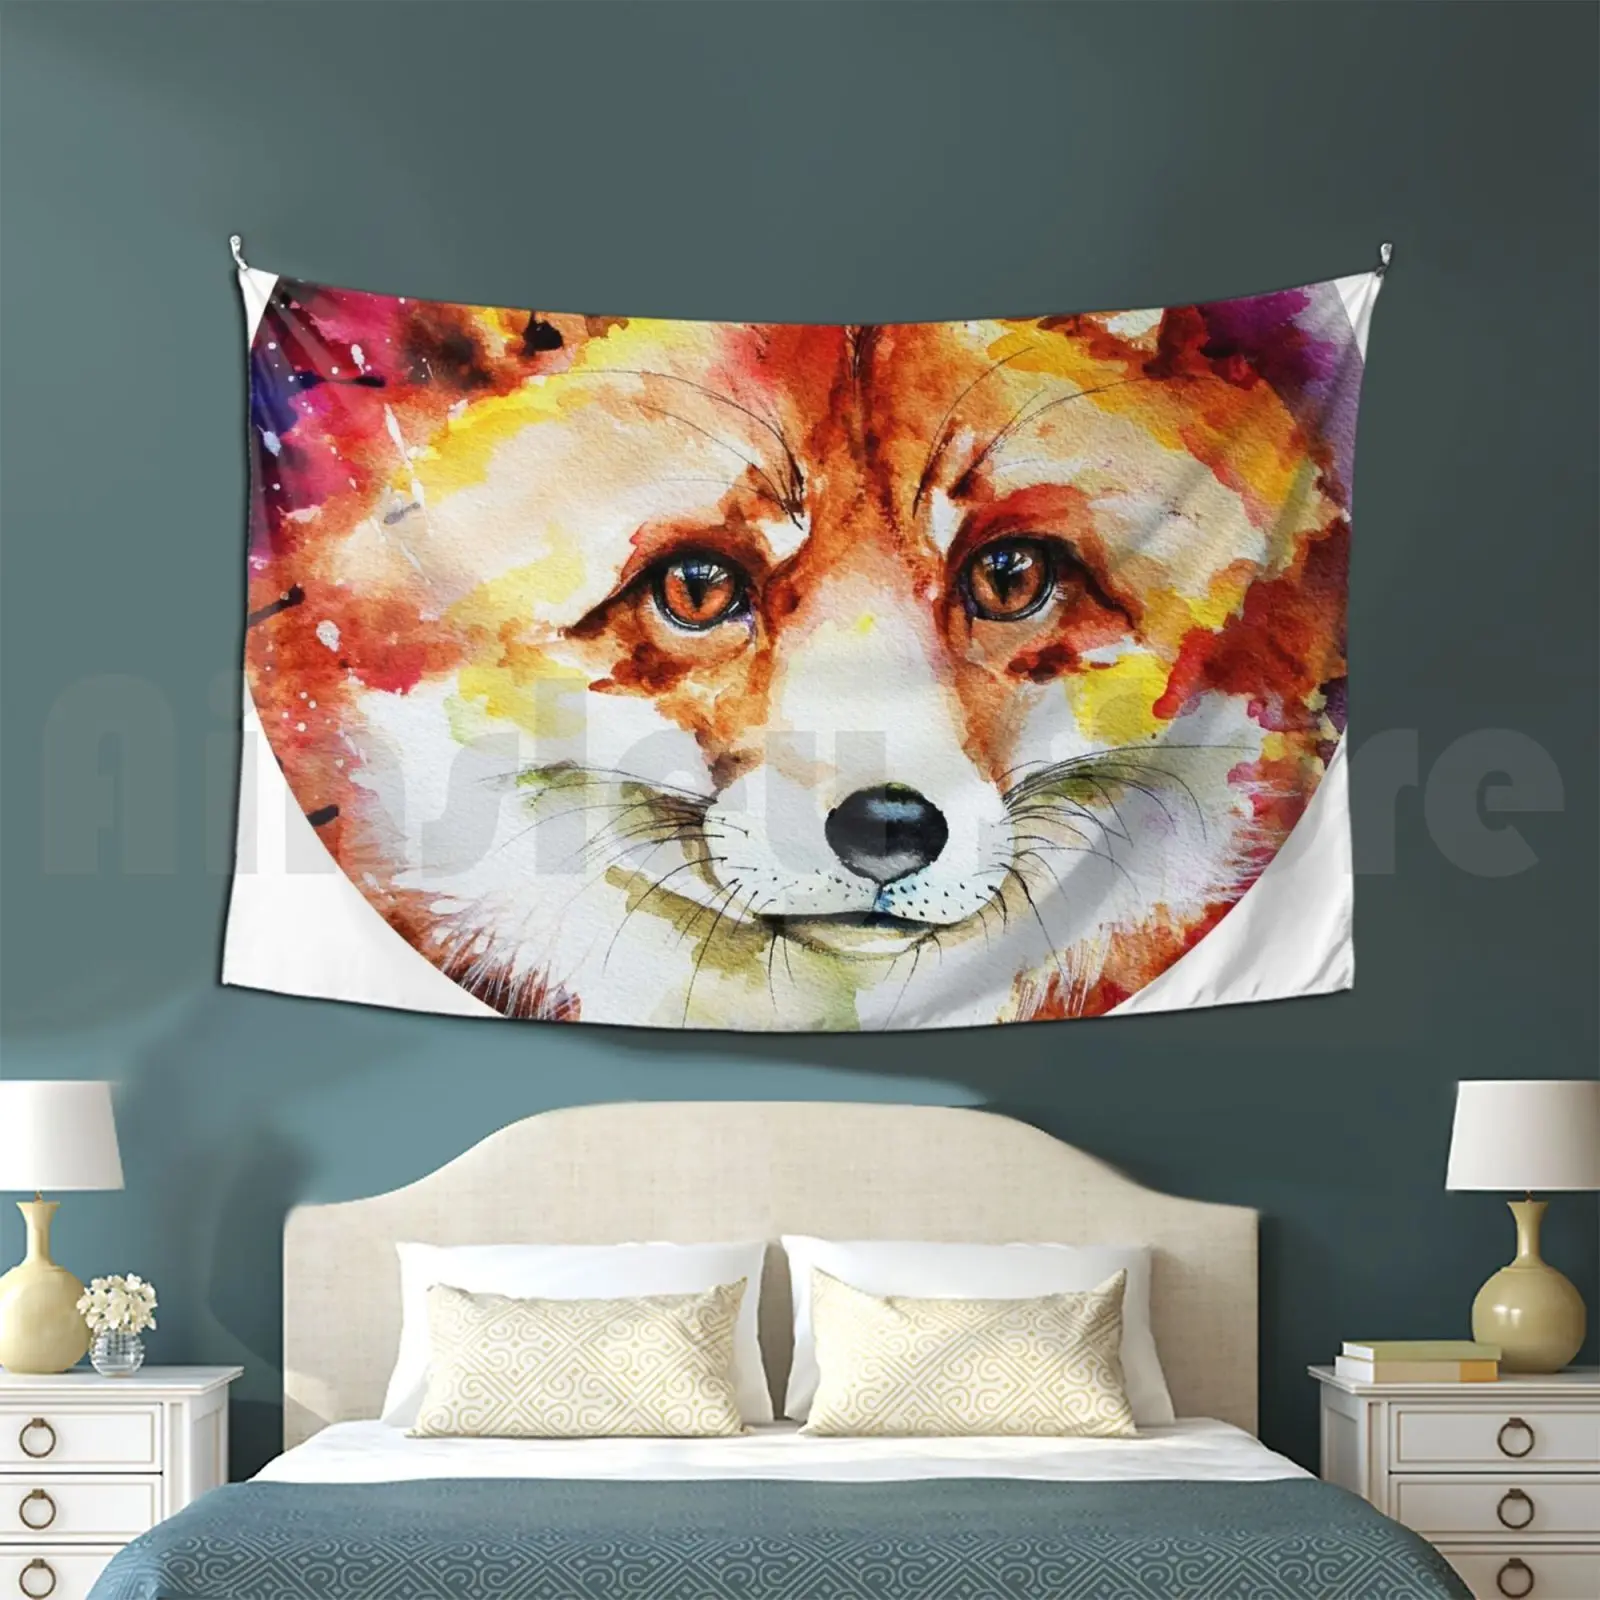 

Red Fox Tapestry Living Room Bedroom Red Fox Animal Animals Watercolor Isabel Salvador Fur Colorful Color Eyes Brown